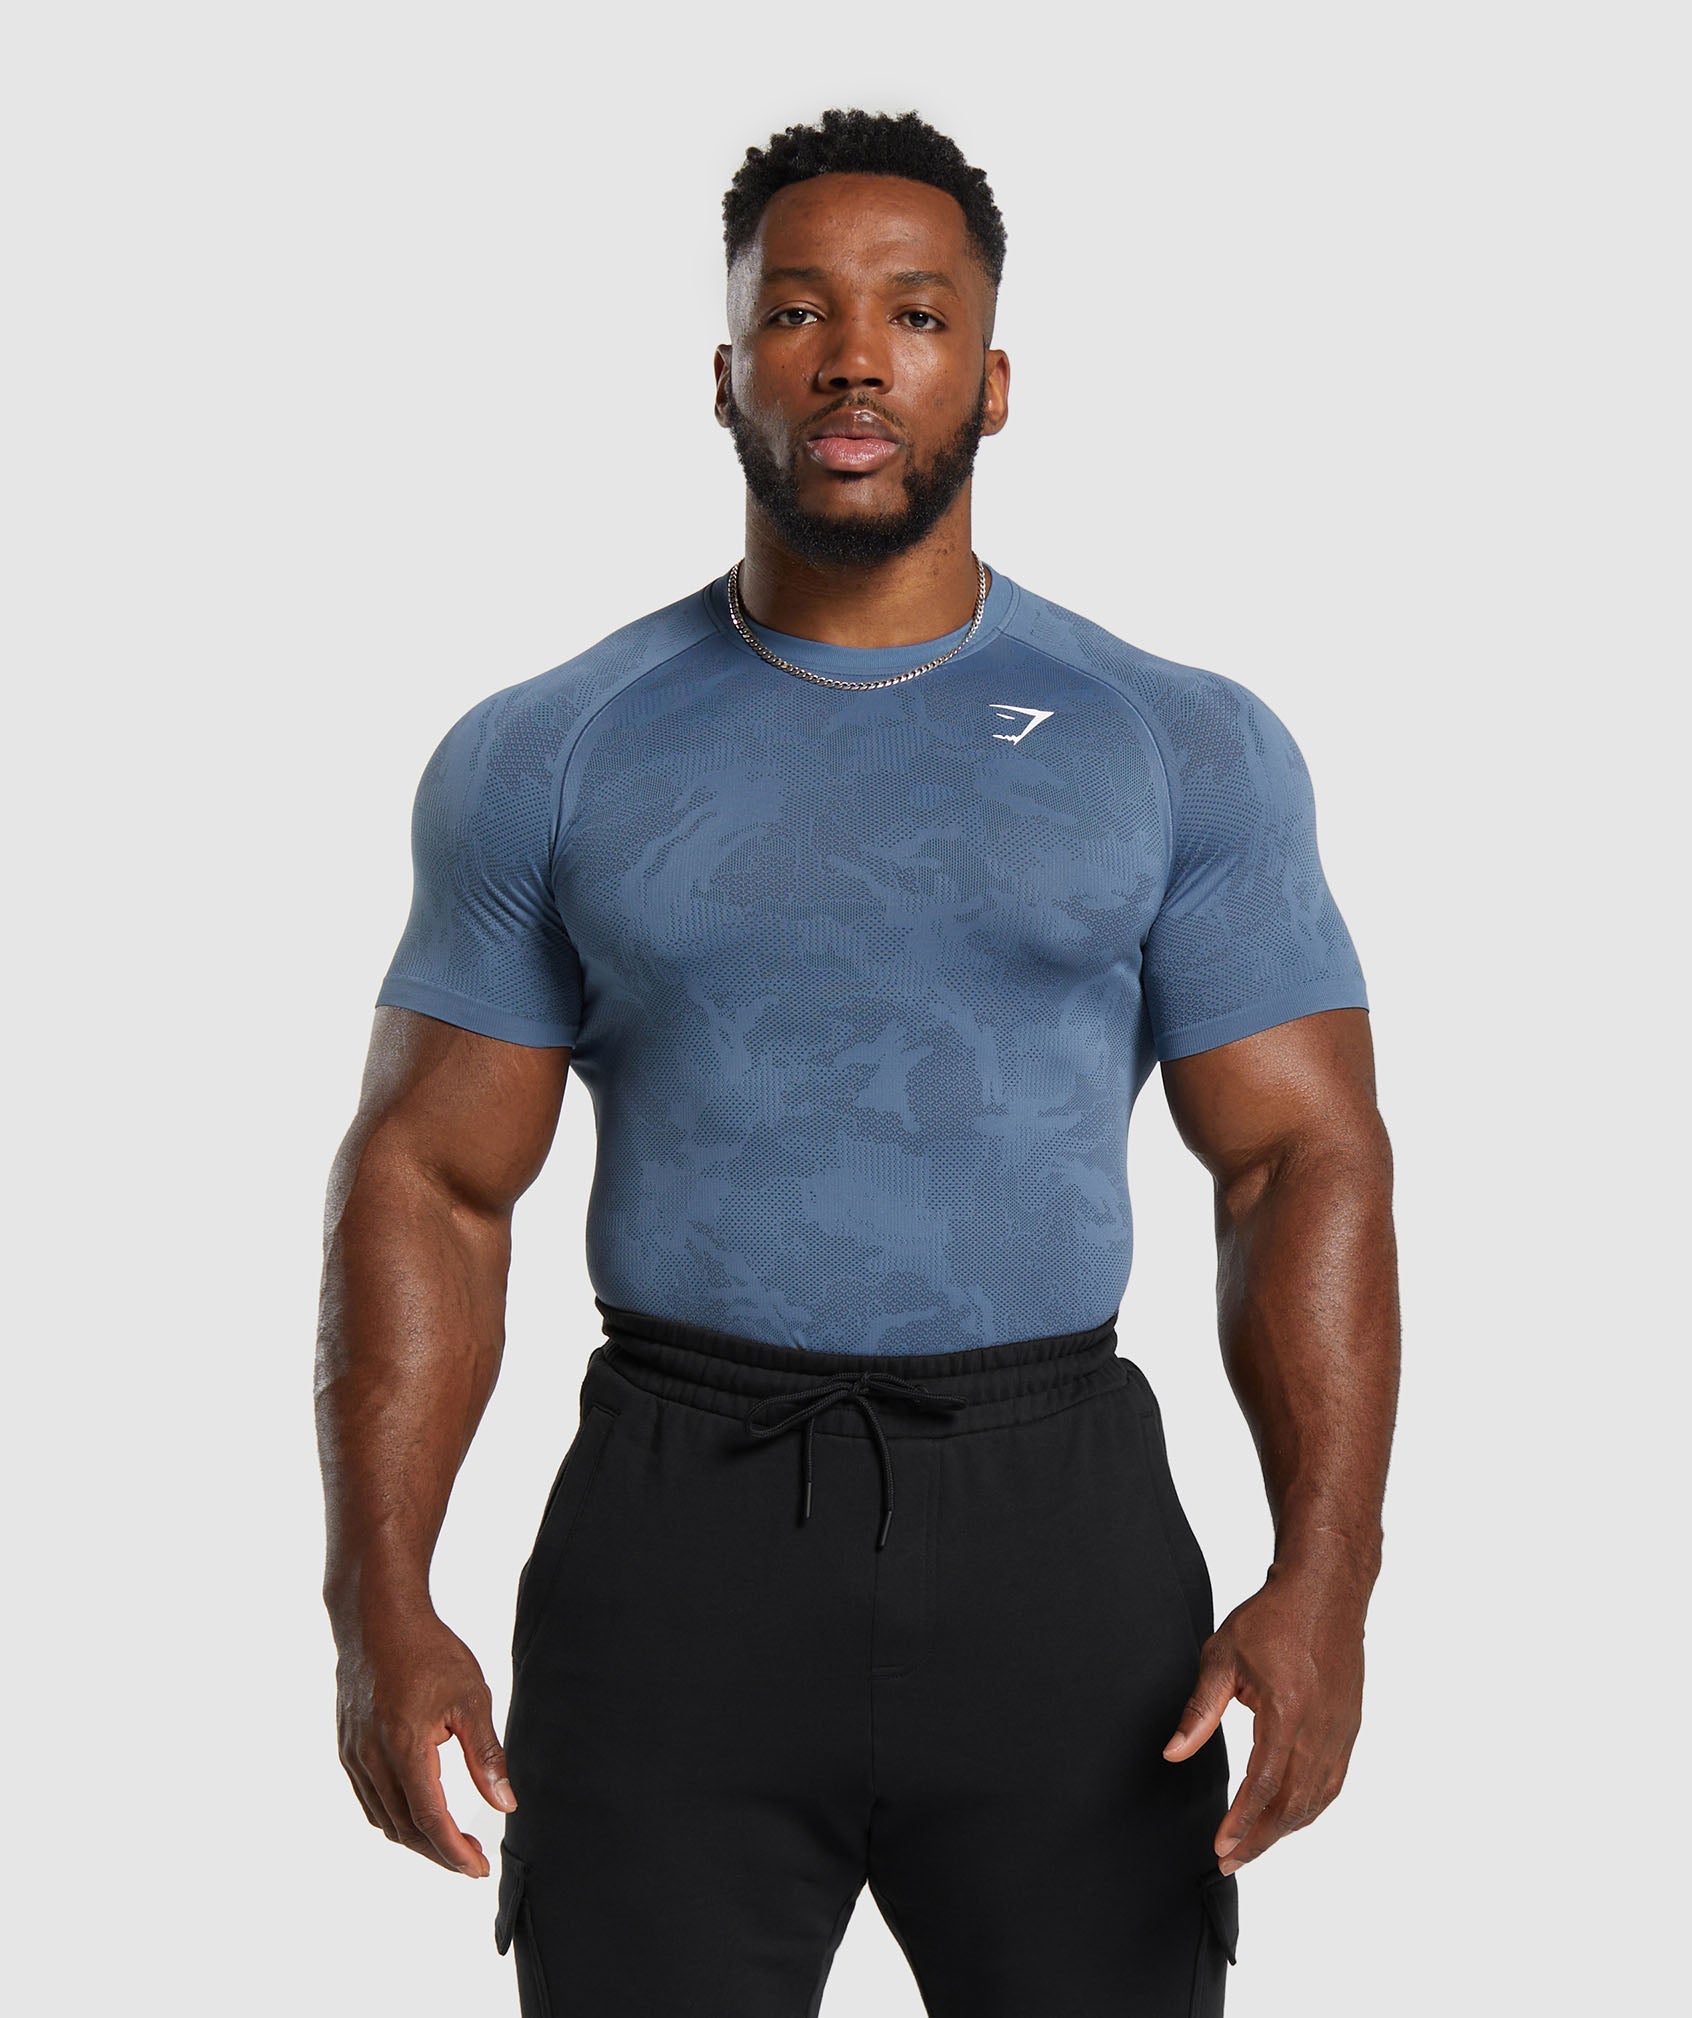 Geo Seamless T-Shirt in {{variantColor} is out of stock